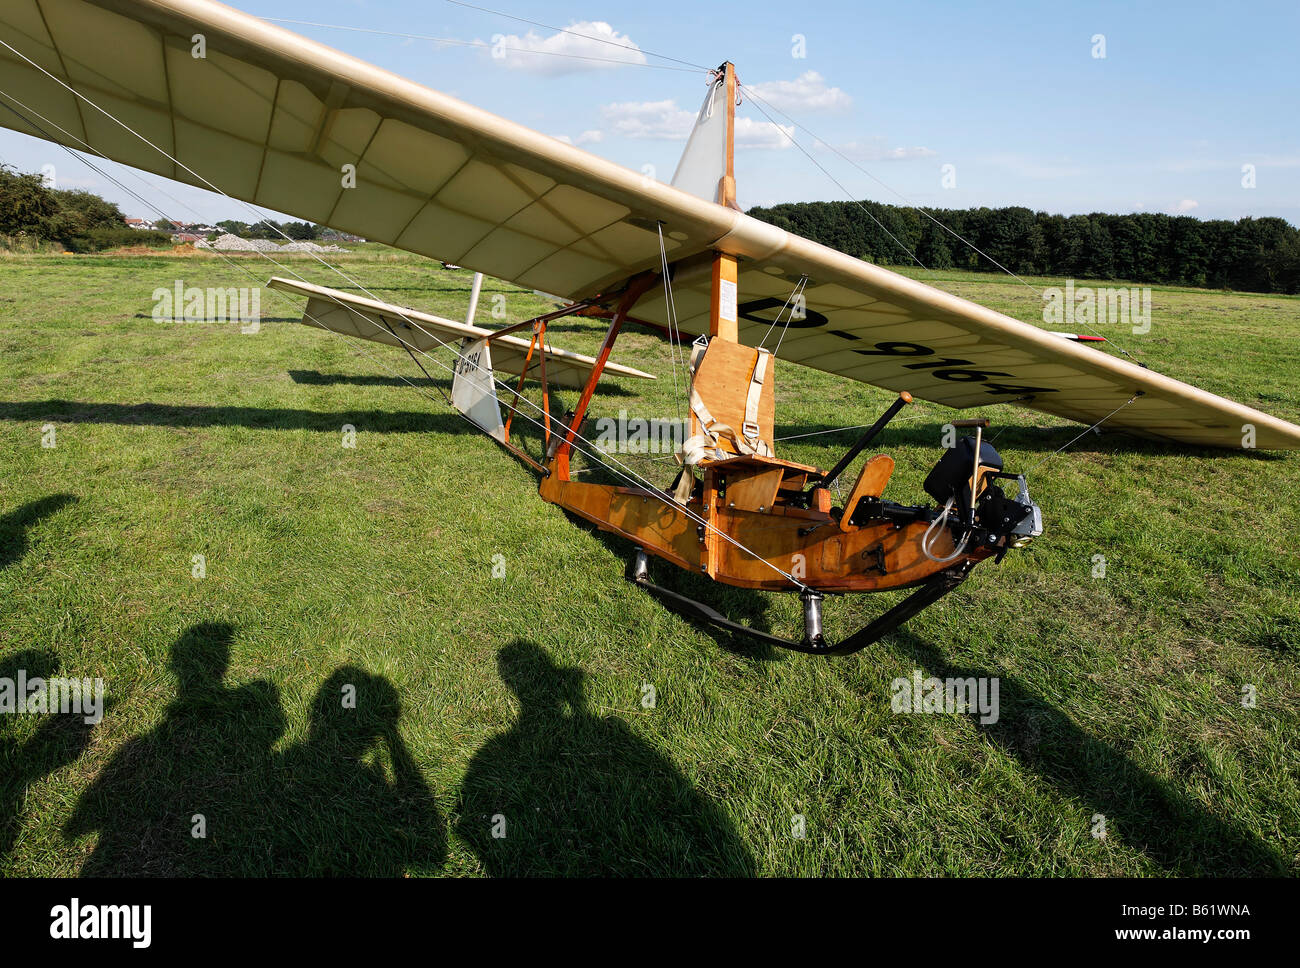 Historic glider SG38 with shadows of spectators on the grass, wooden construction with an open seat, glider to train beginners  Stock Photo